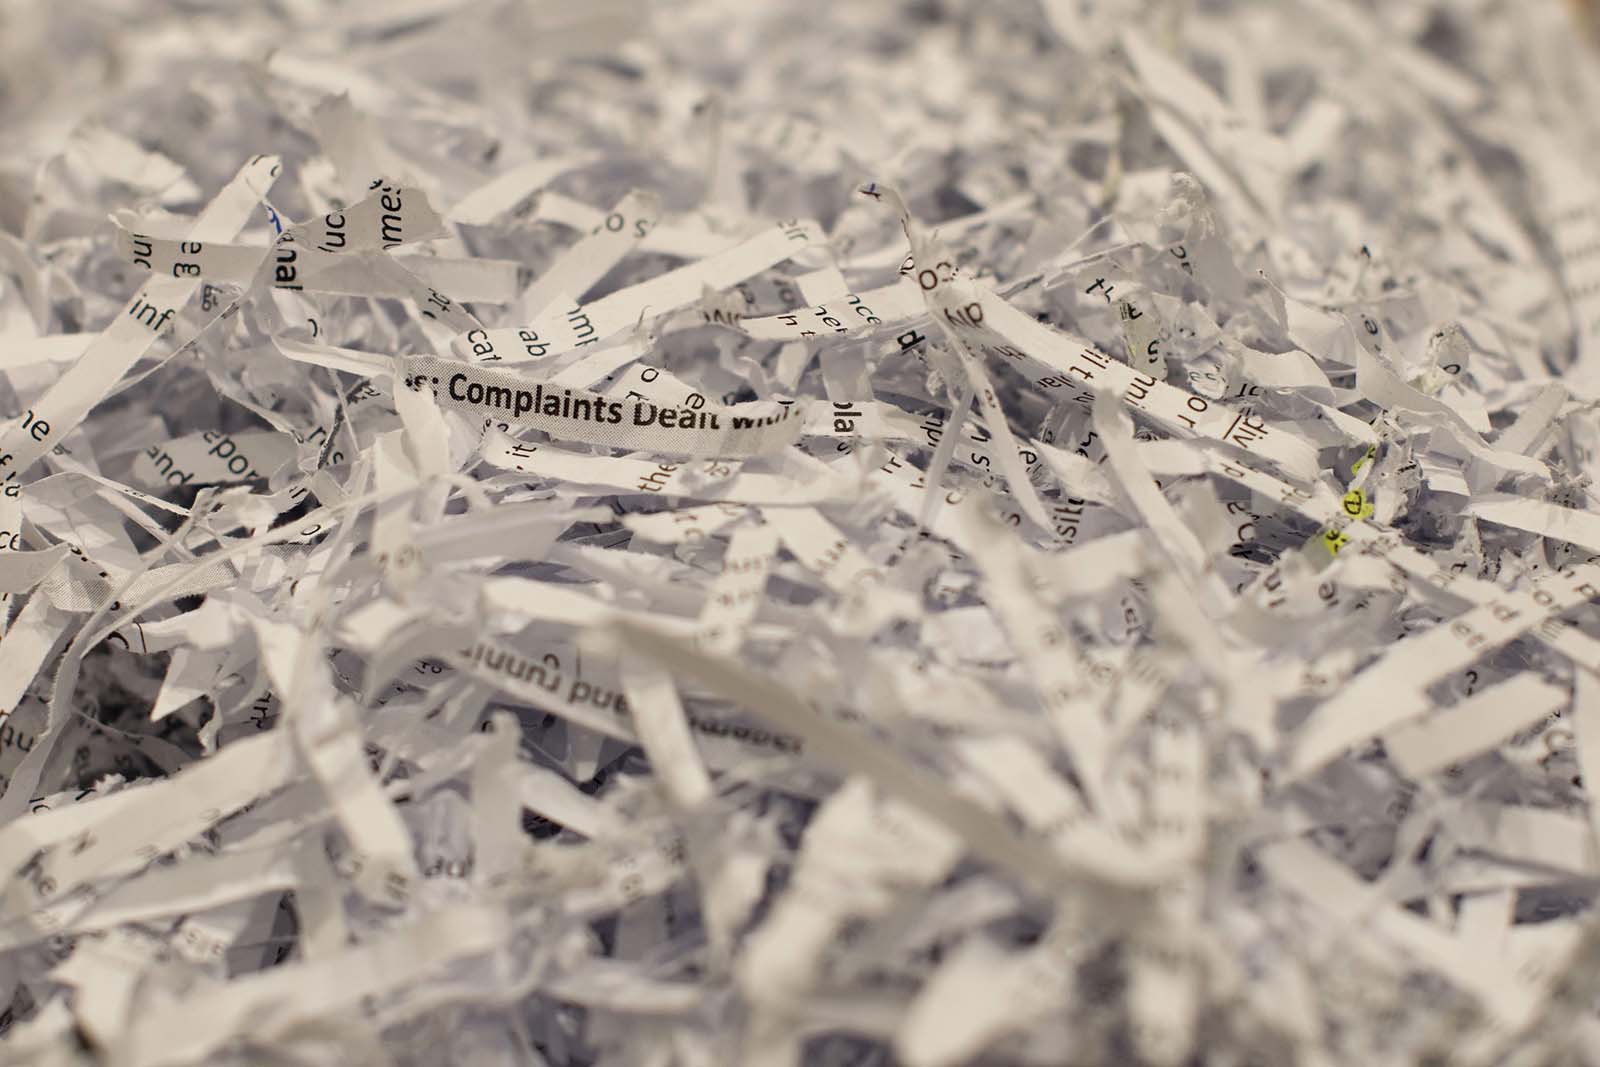 Secure document shredding services bring easy compliance with GDPR and privacy laws. Discover how secure document shredding saves your business time and money.